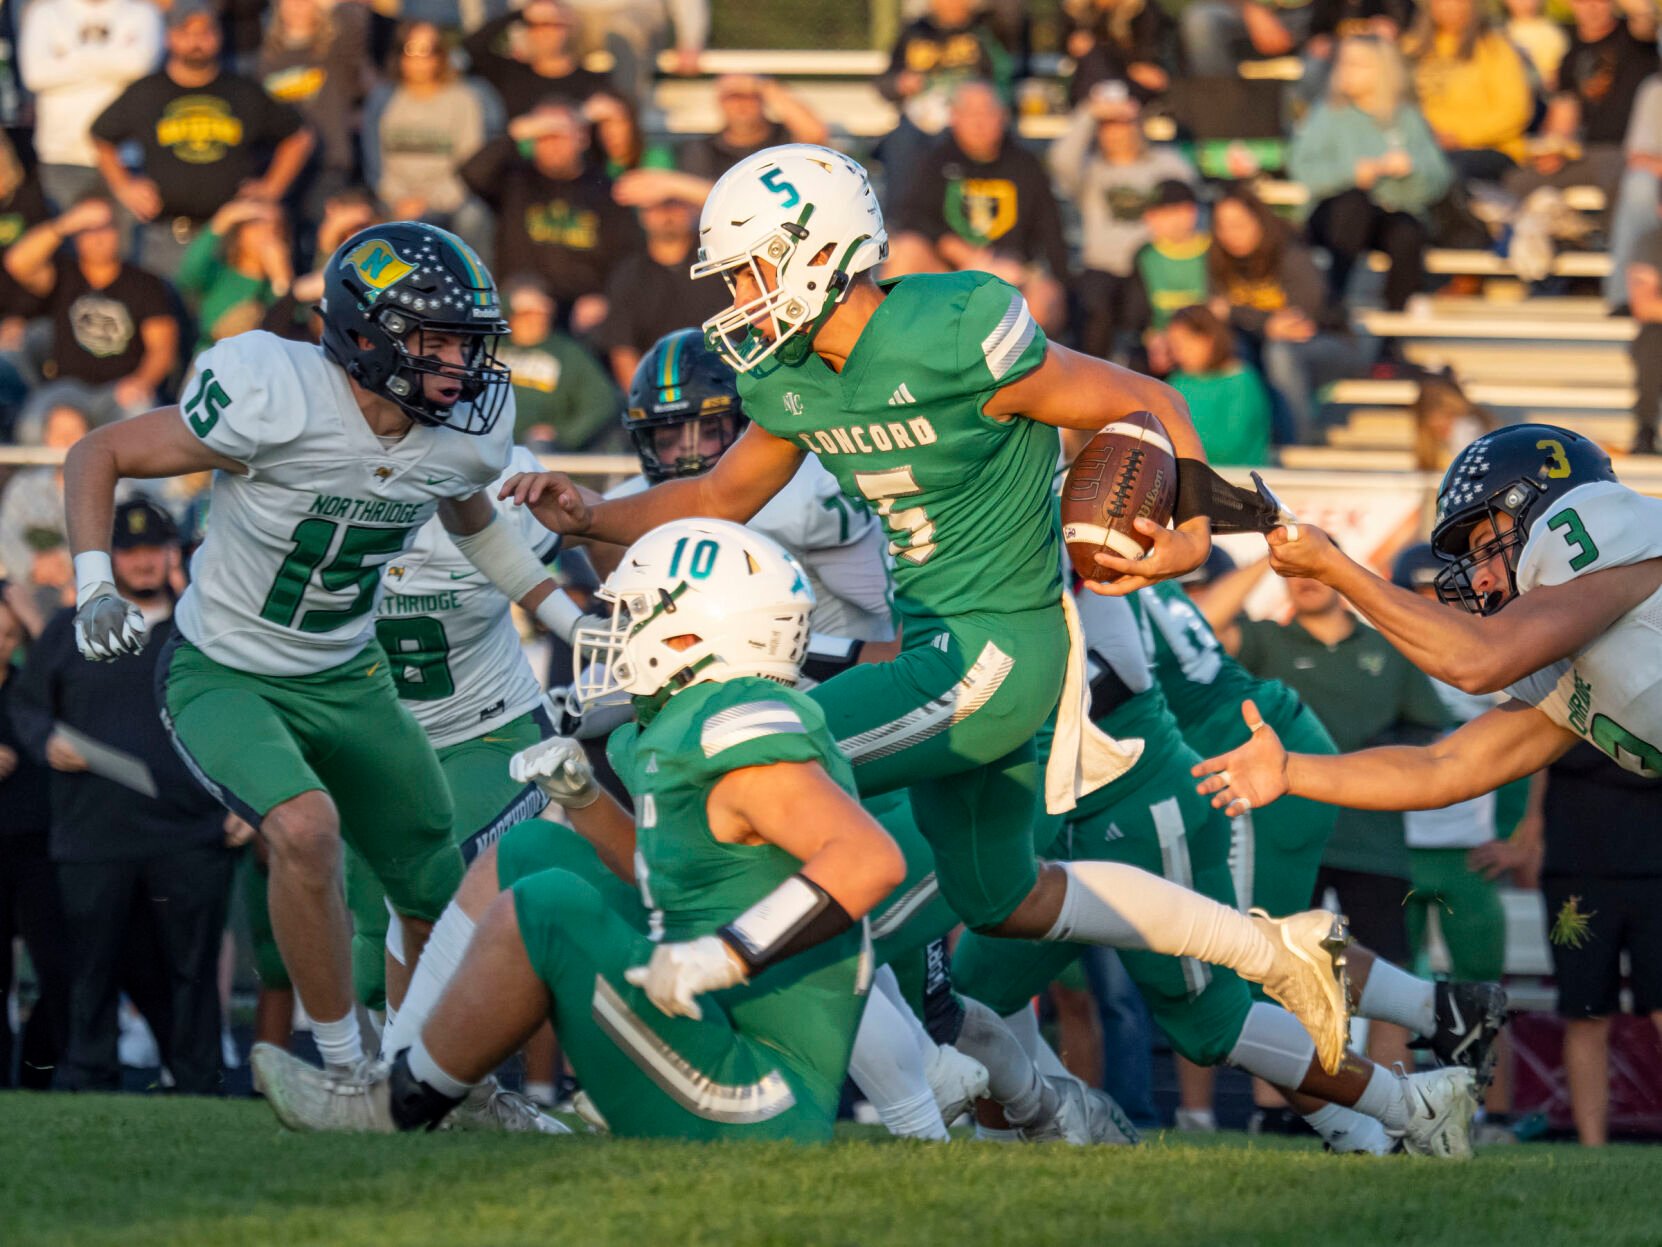 Week 8 of High School Football: Exciting Matchups and Playoff Implications